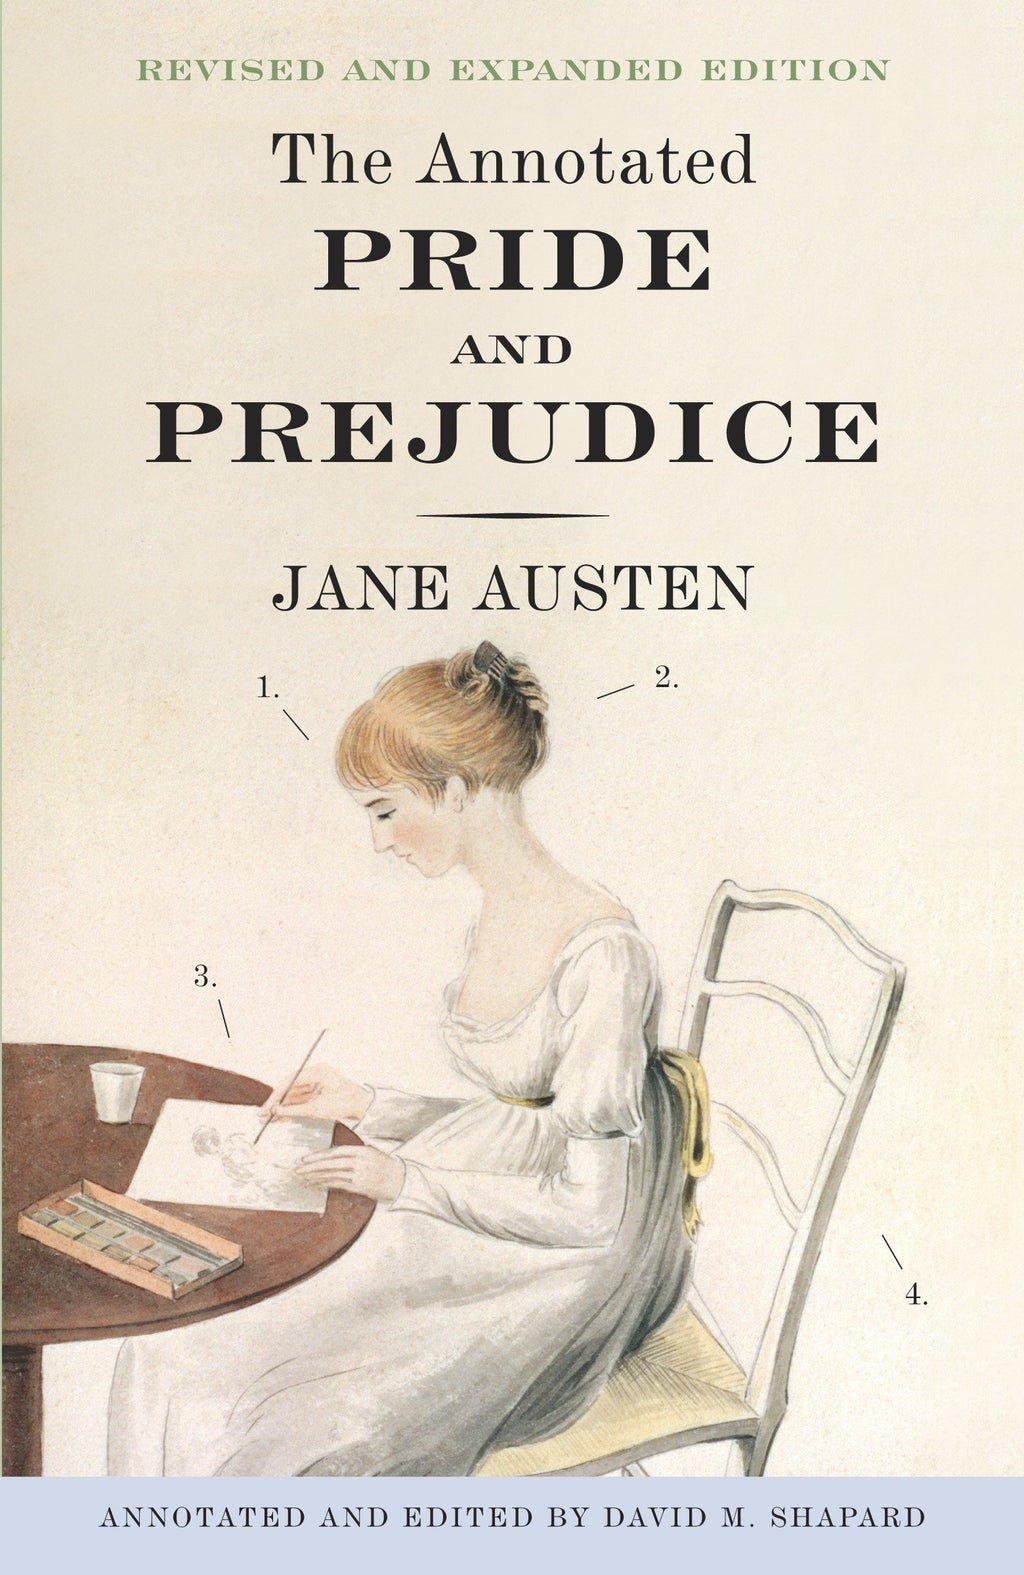 Cover of  “Pride and Prejudice”, by Jane Austen